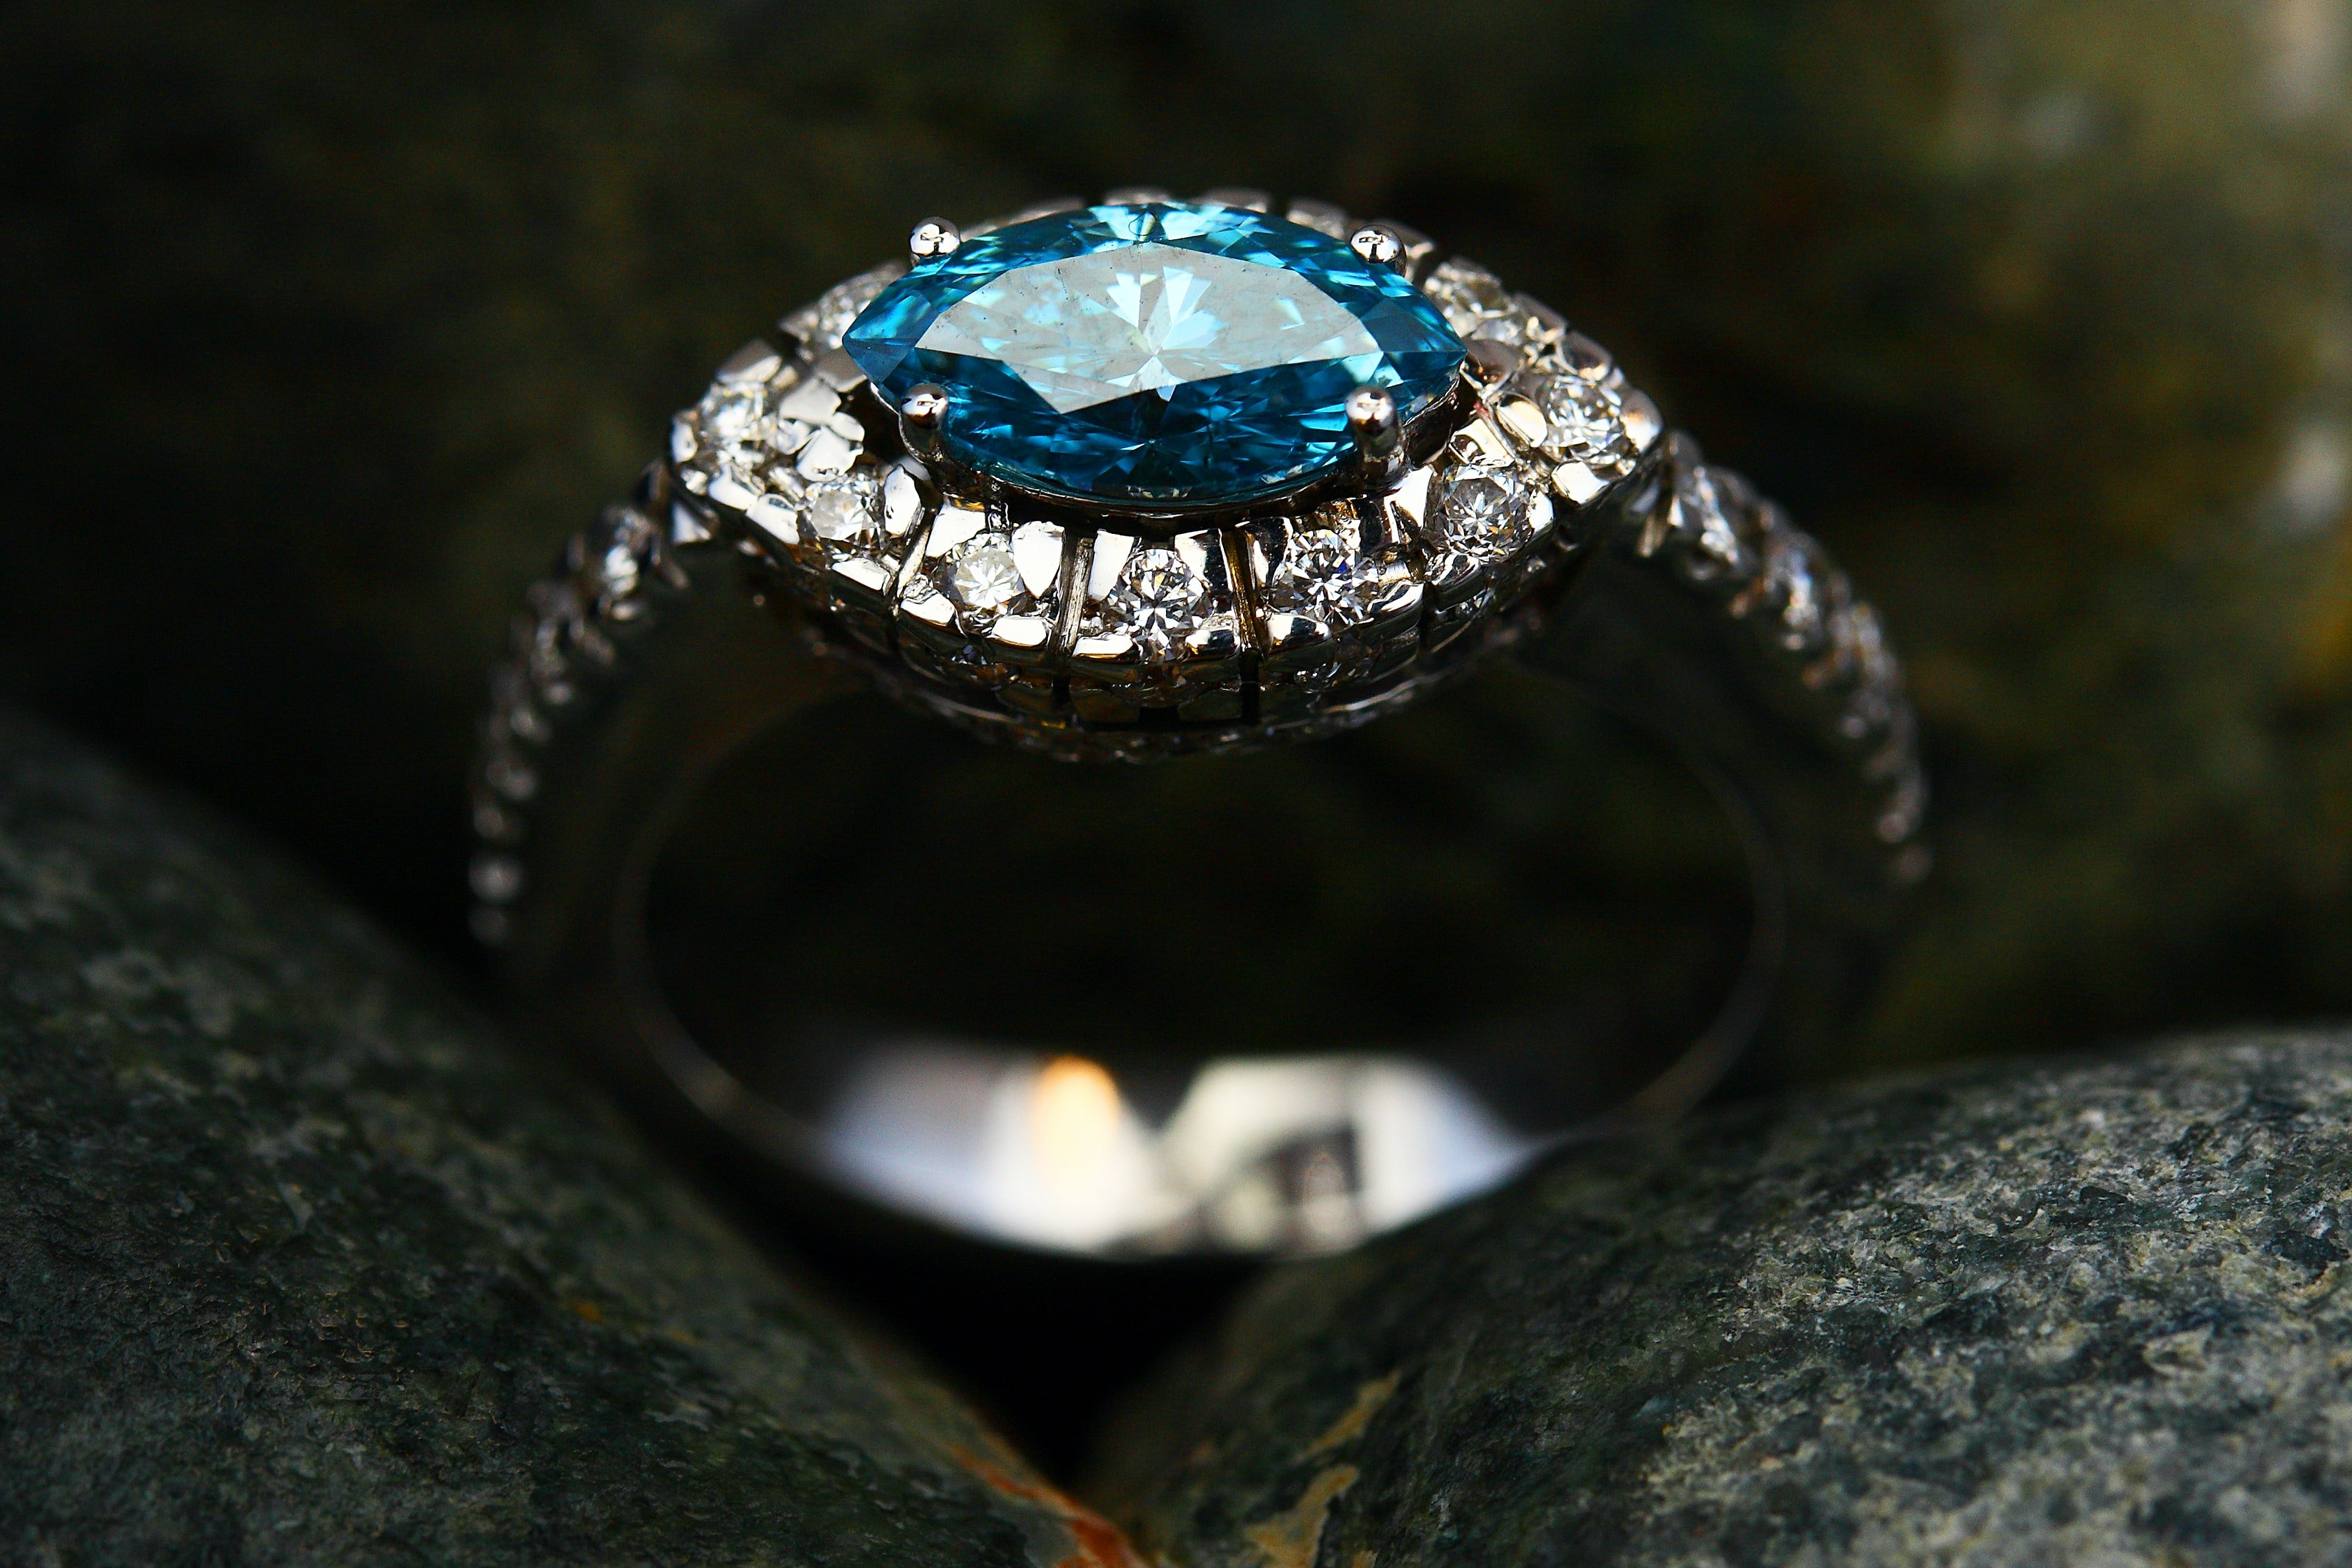 Adam chanced upon a long-lost family ring while lighting the fireplace. | Source: Unsplash